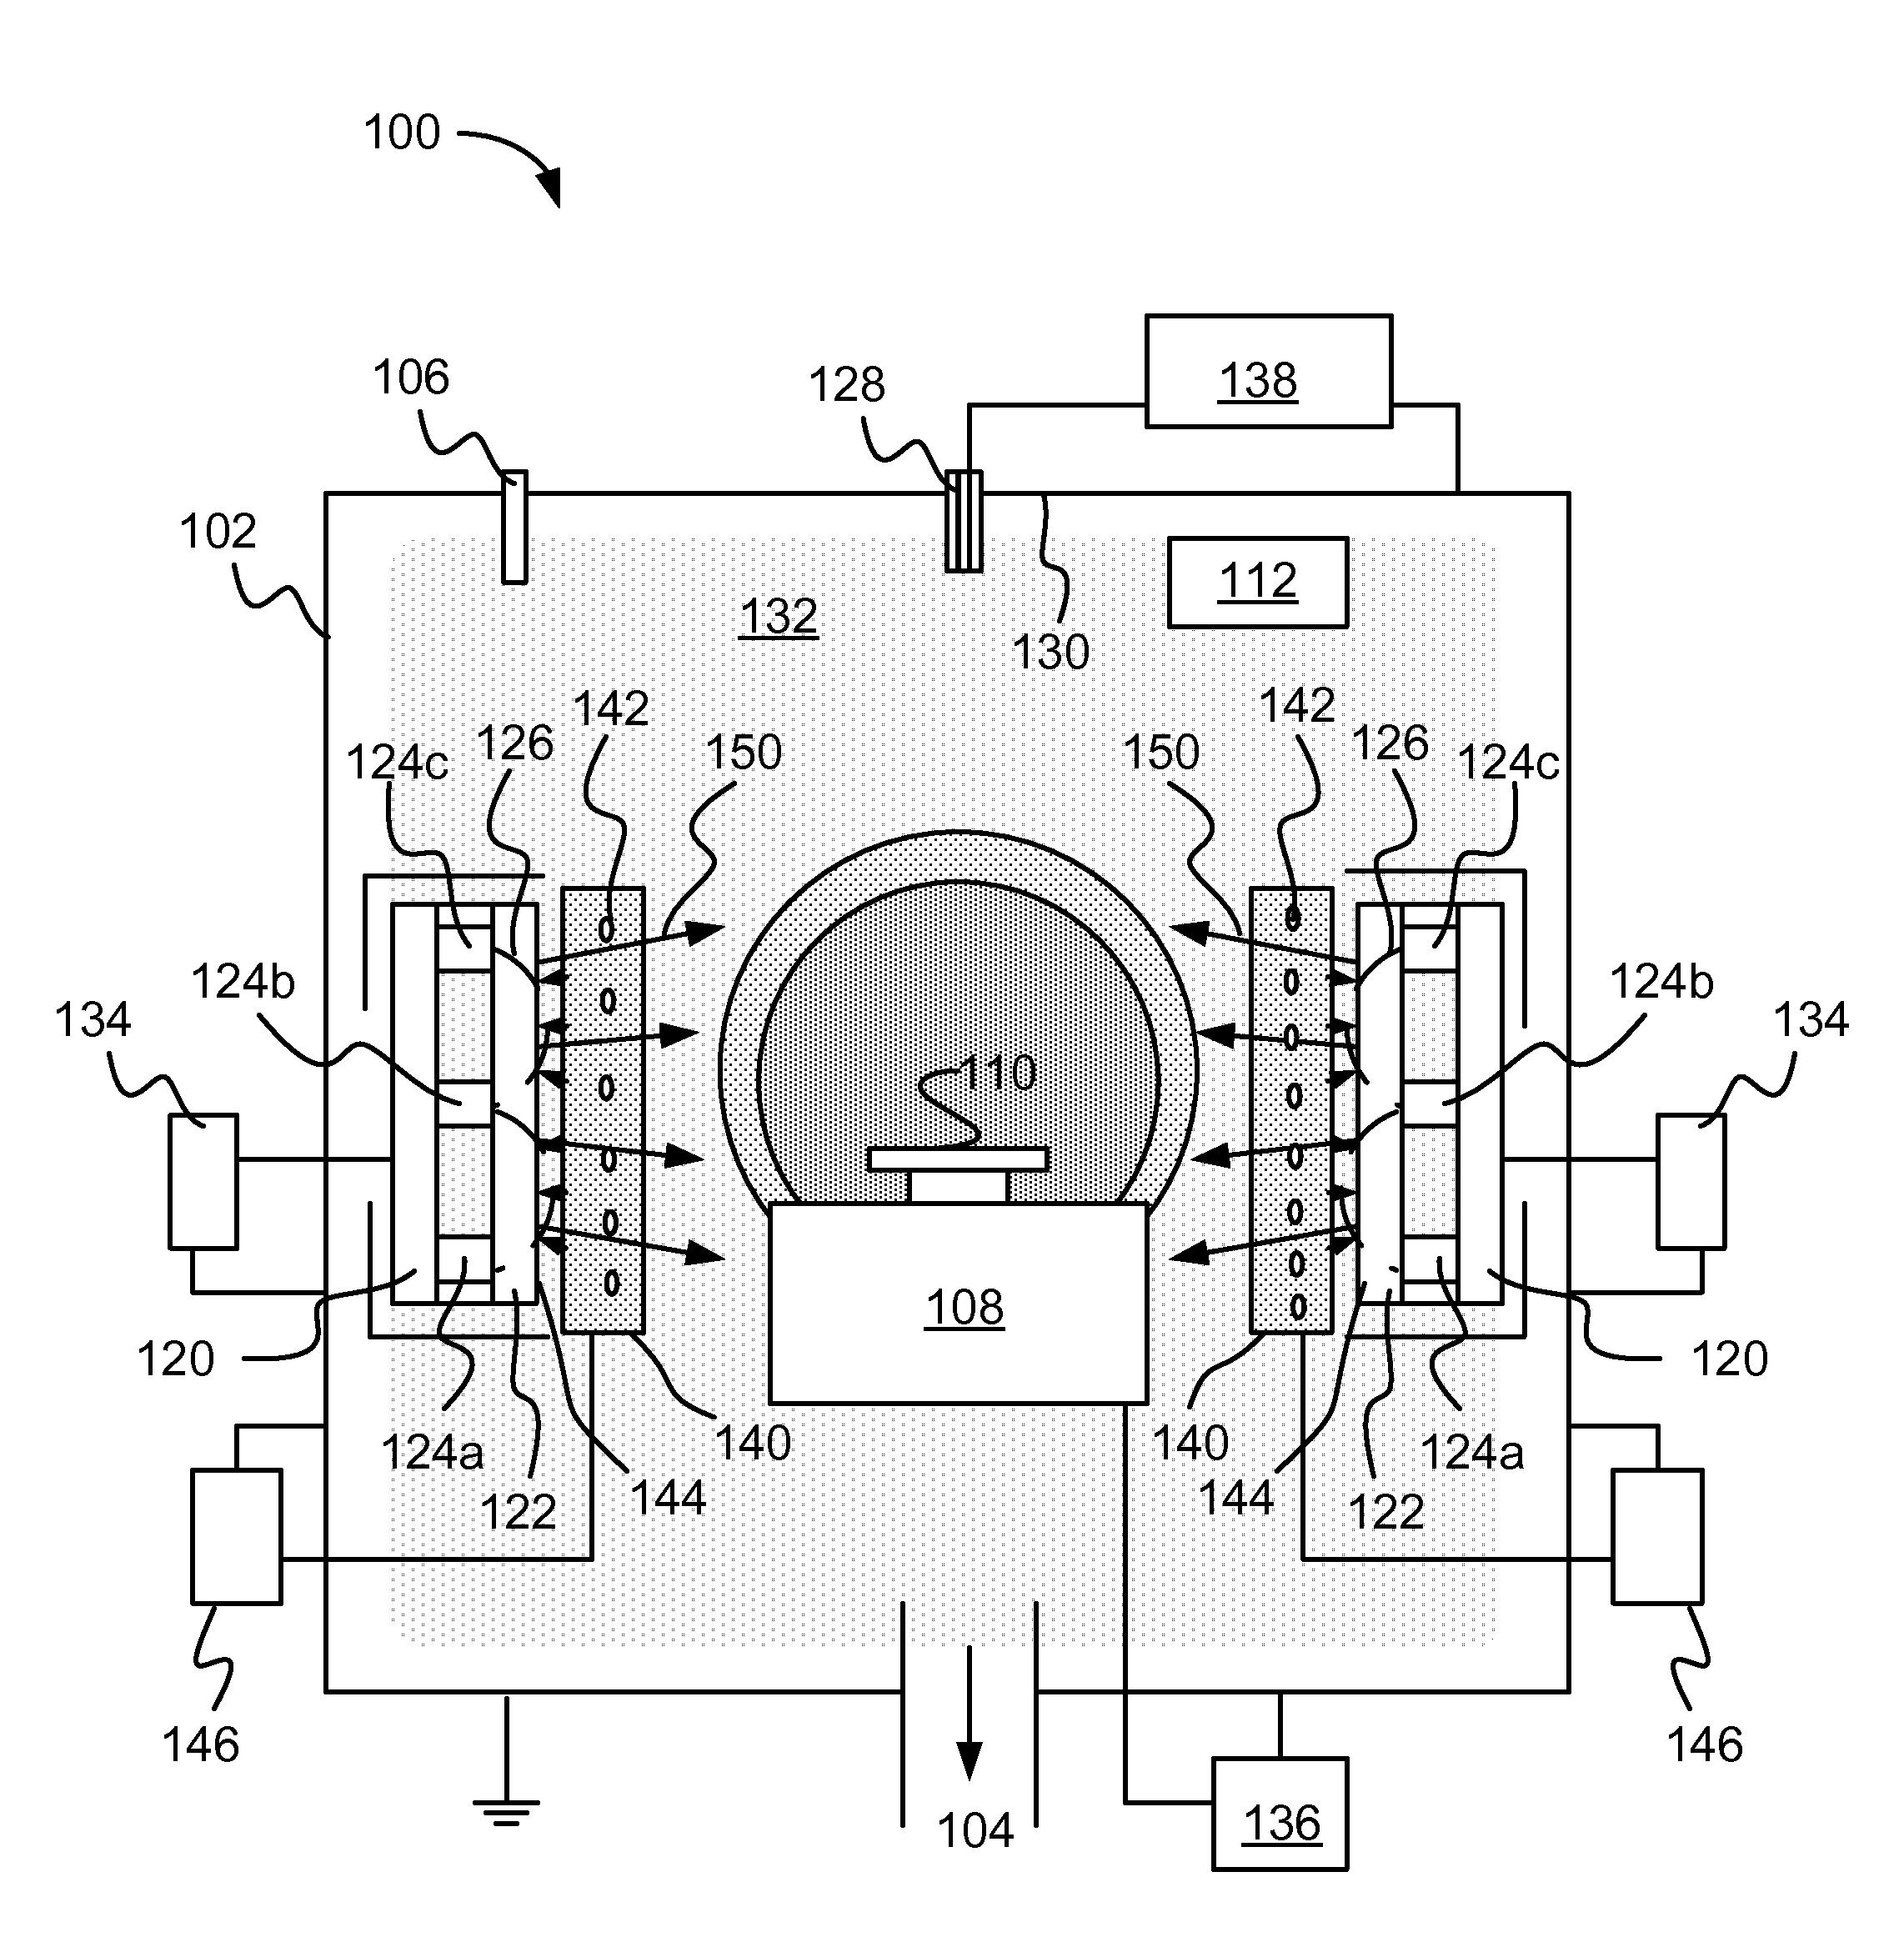 Method And Apparatus For Producing An Ionized Vapor Deposition Coating